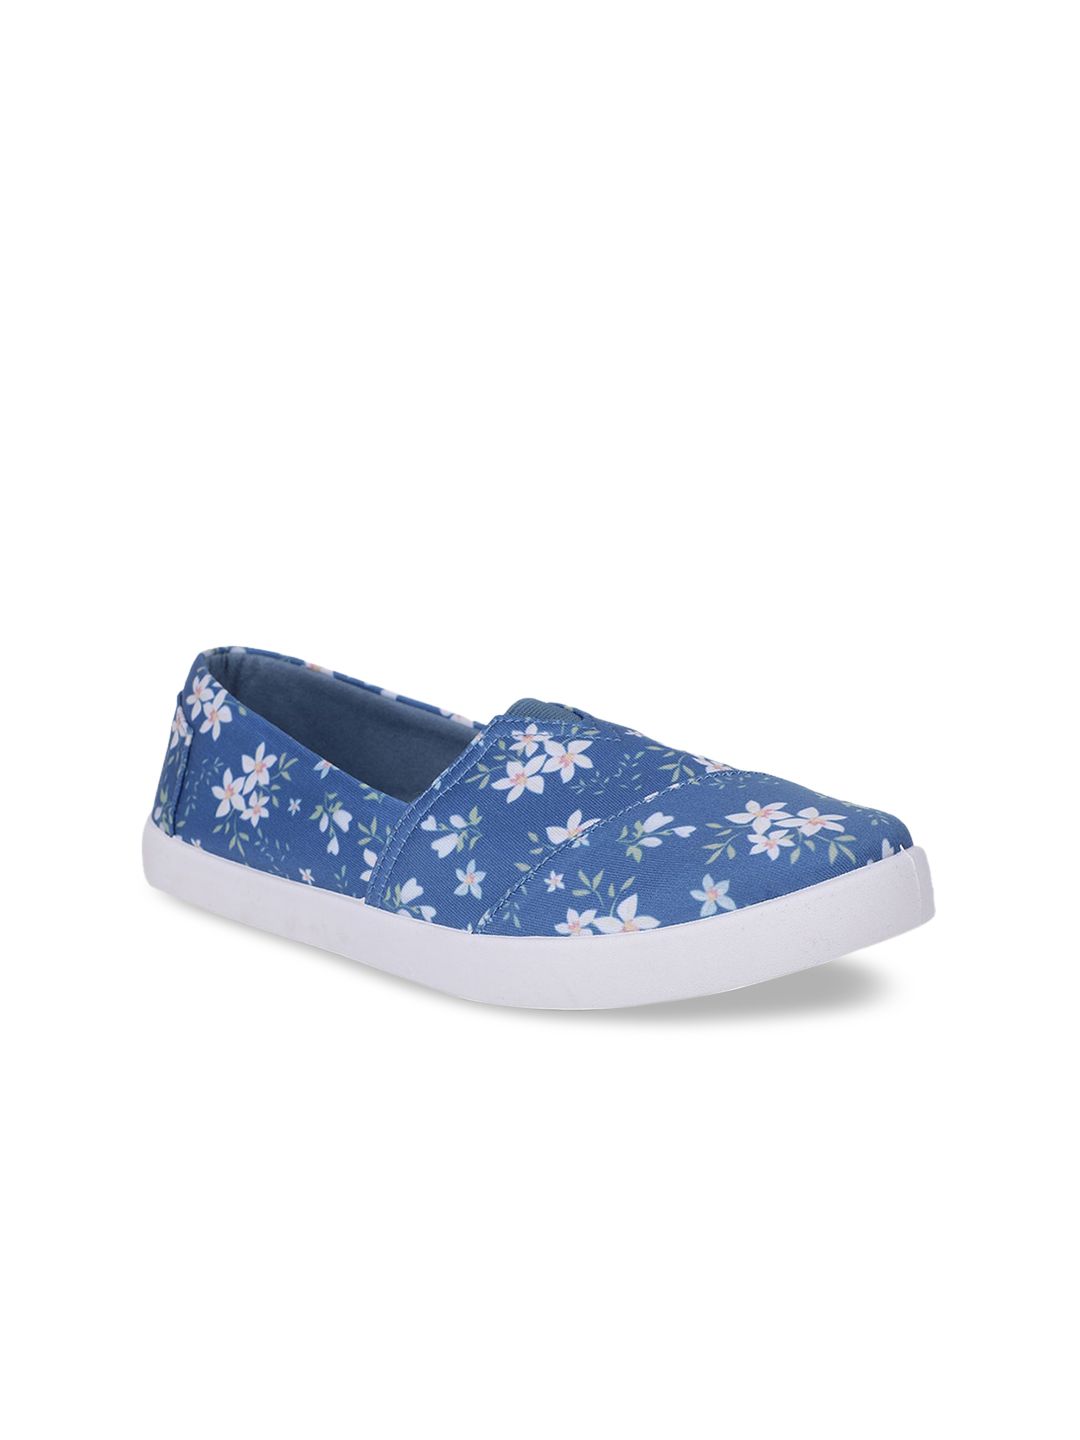 Bata Women Blue Floral Slip-On Sneakers Price in India